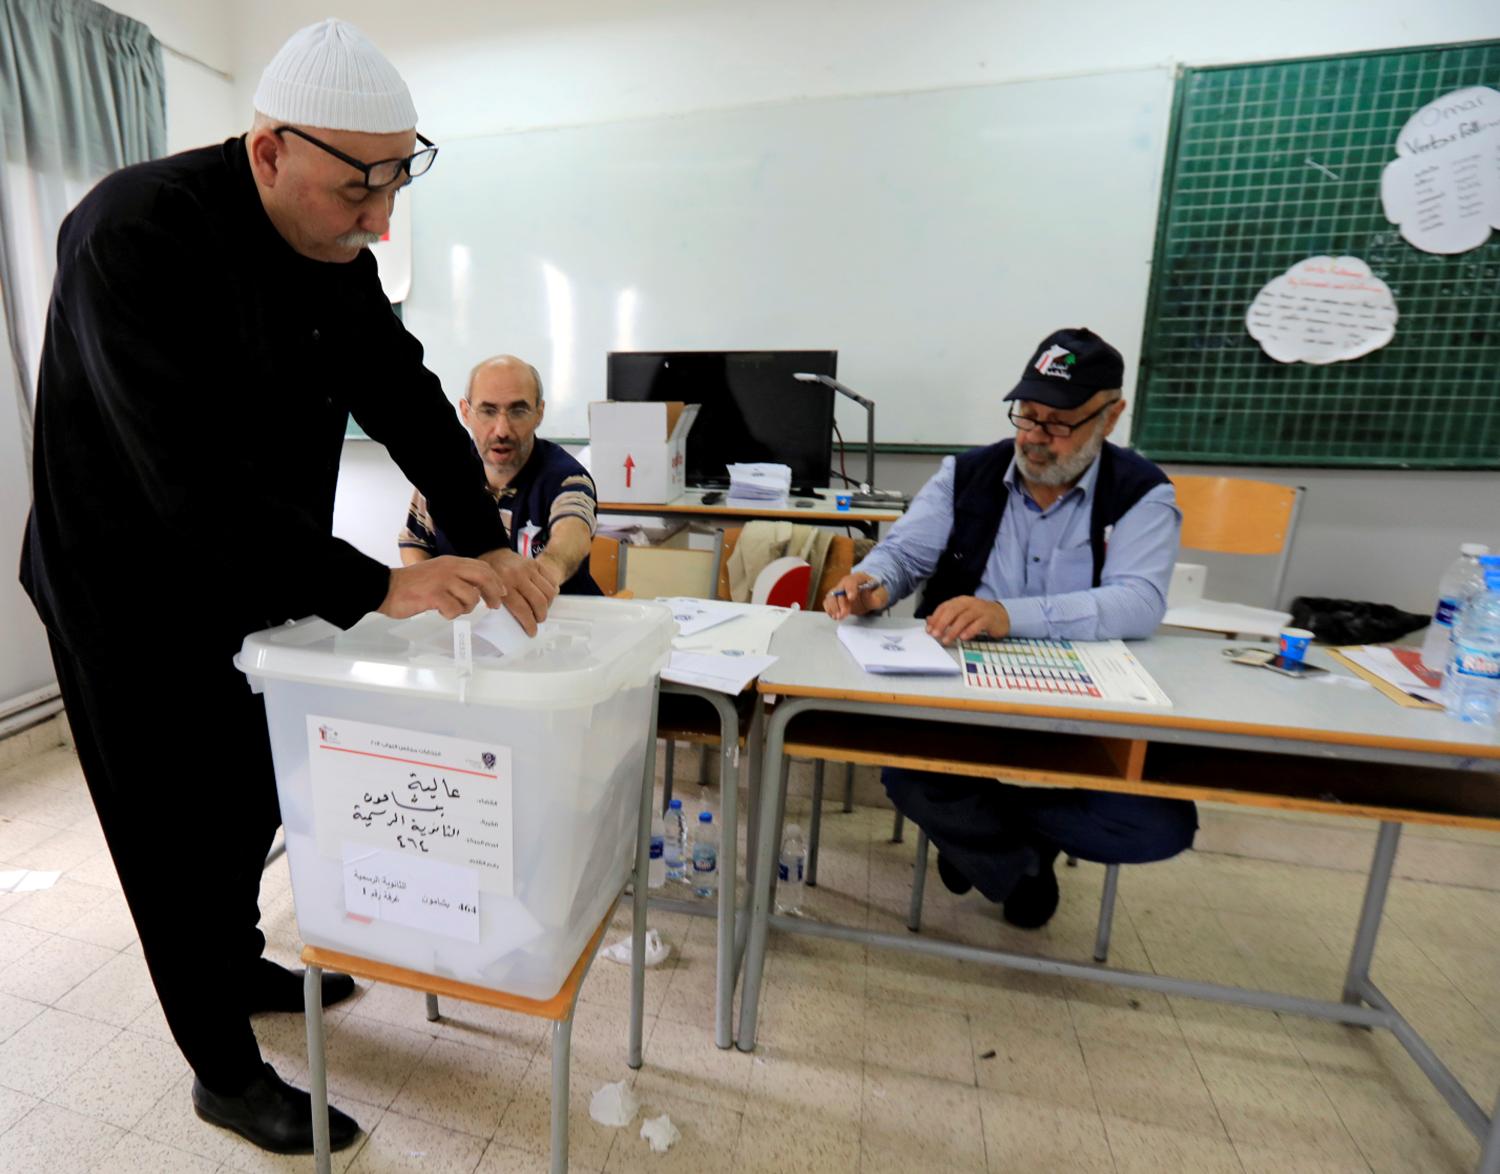 A Lebanese Druze man casts his vote at a polling station during the parliamentary election, in Aley, Lebanon, May 6, 2018. REUTERS/ Jamal Saidi - RC1A6824A420